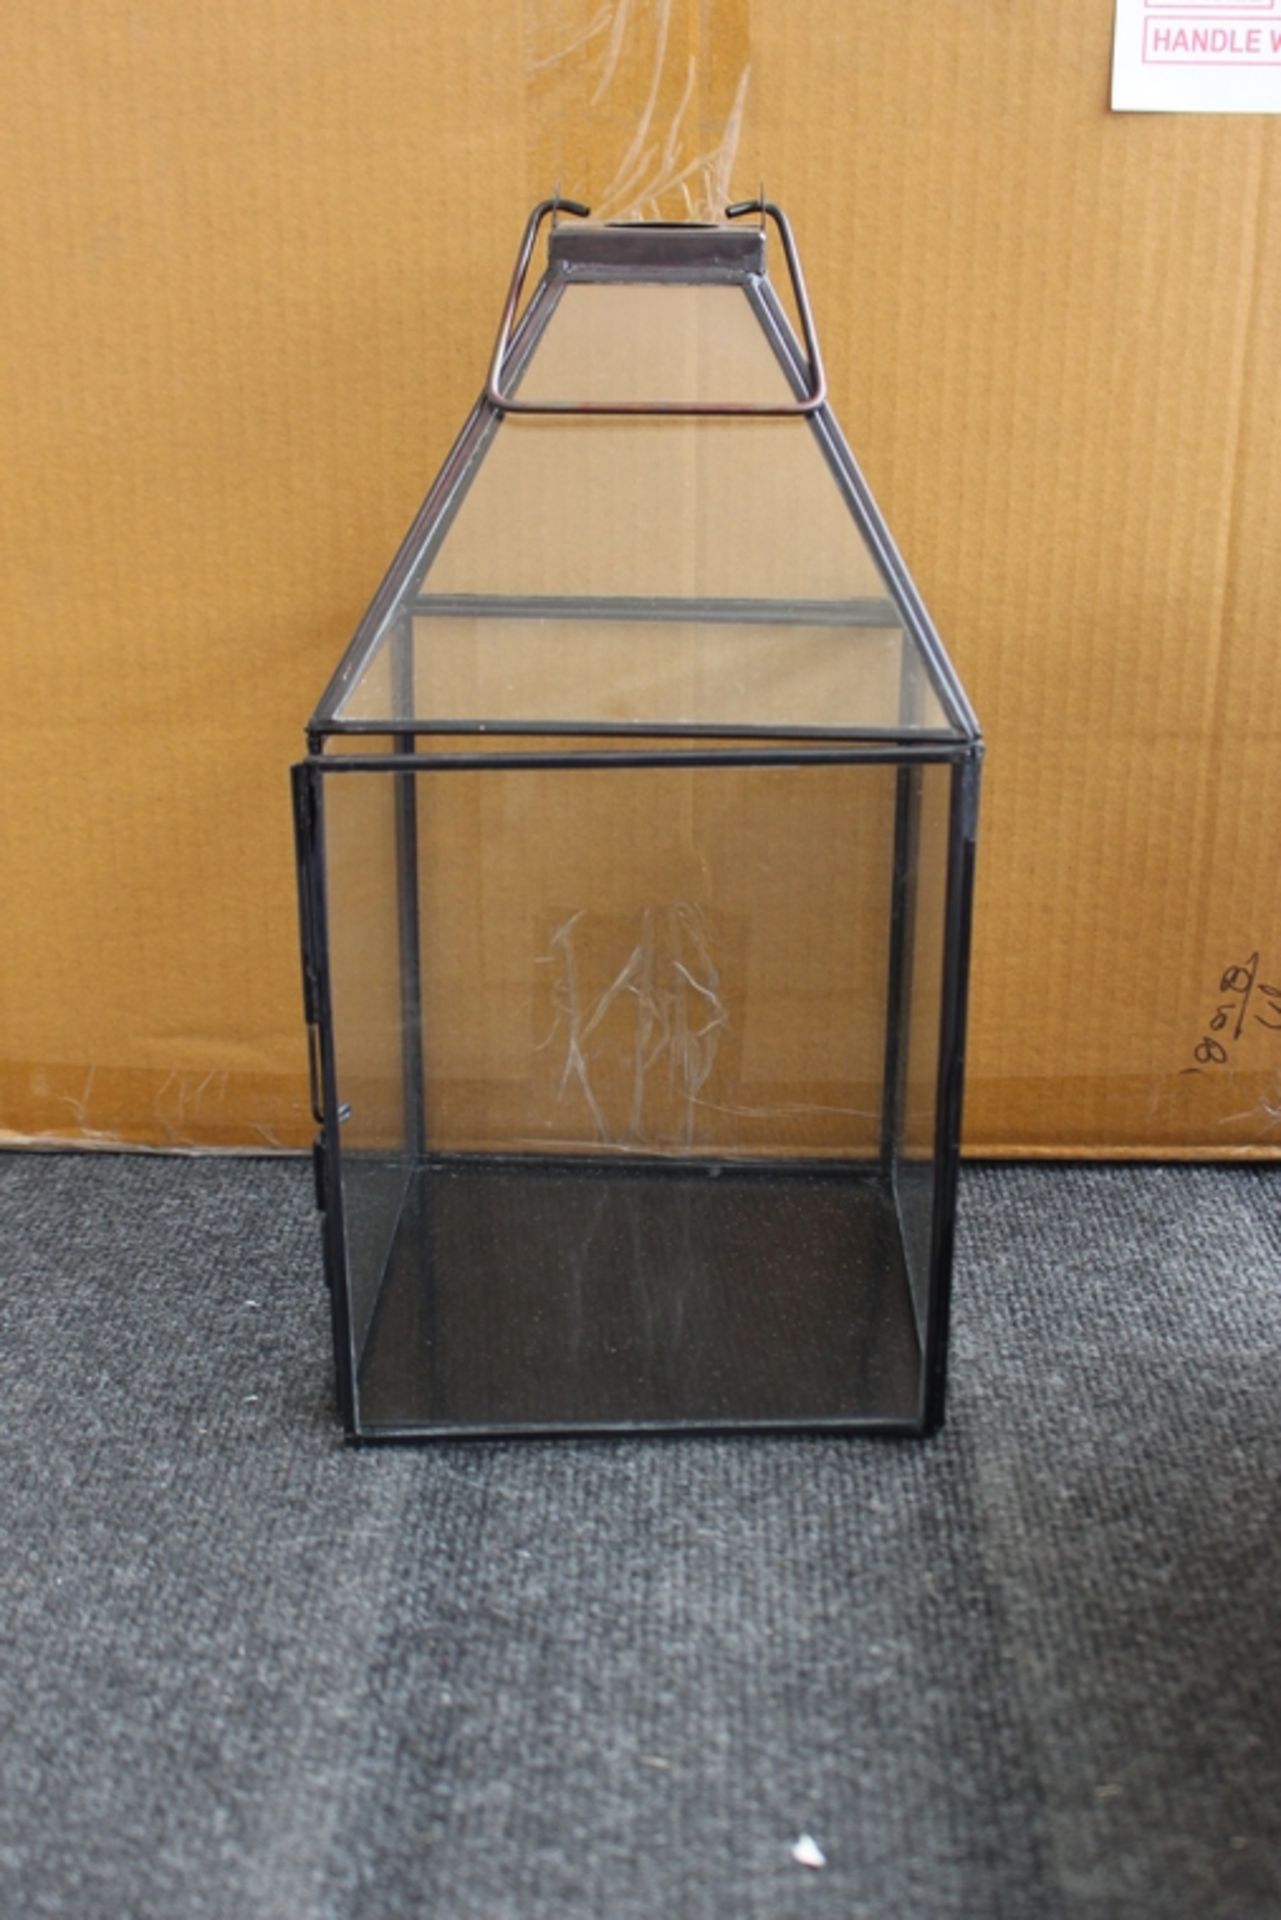 2X UNUSED METAL AND GLASS LANTERNS IN BLACK COMBINED RRP £50 (12.07.18)